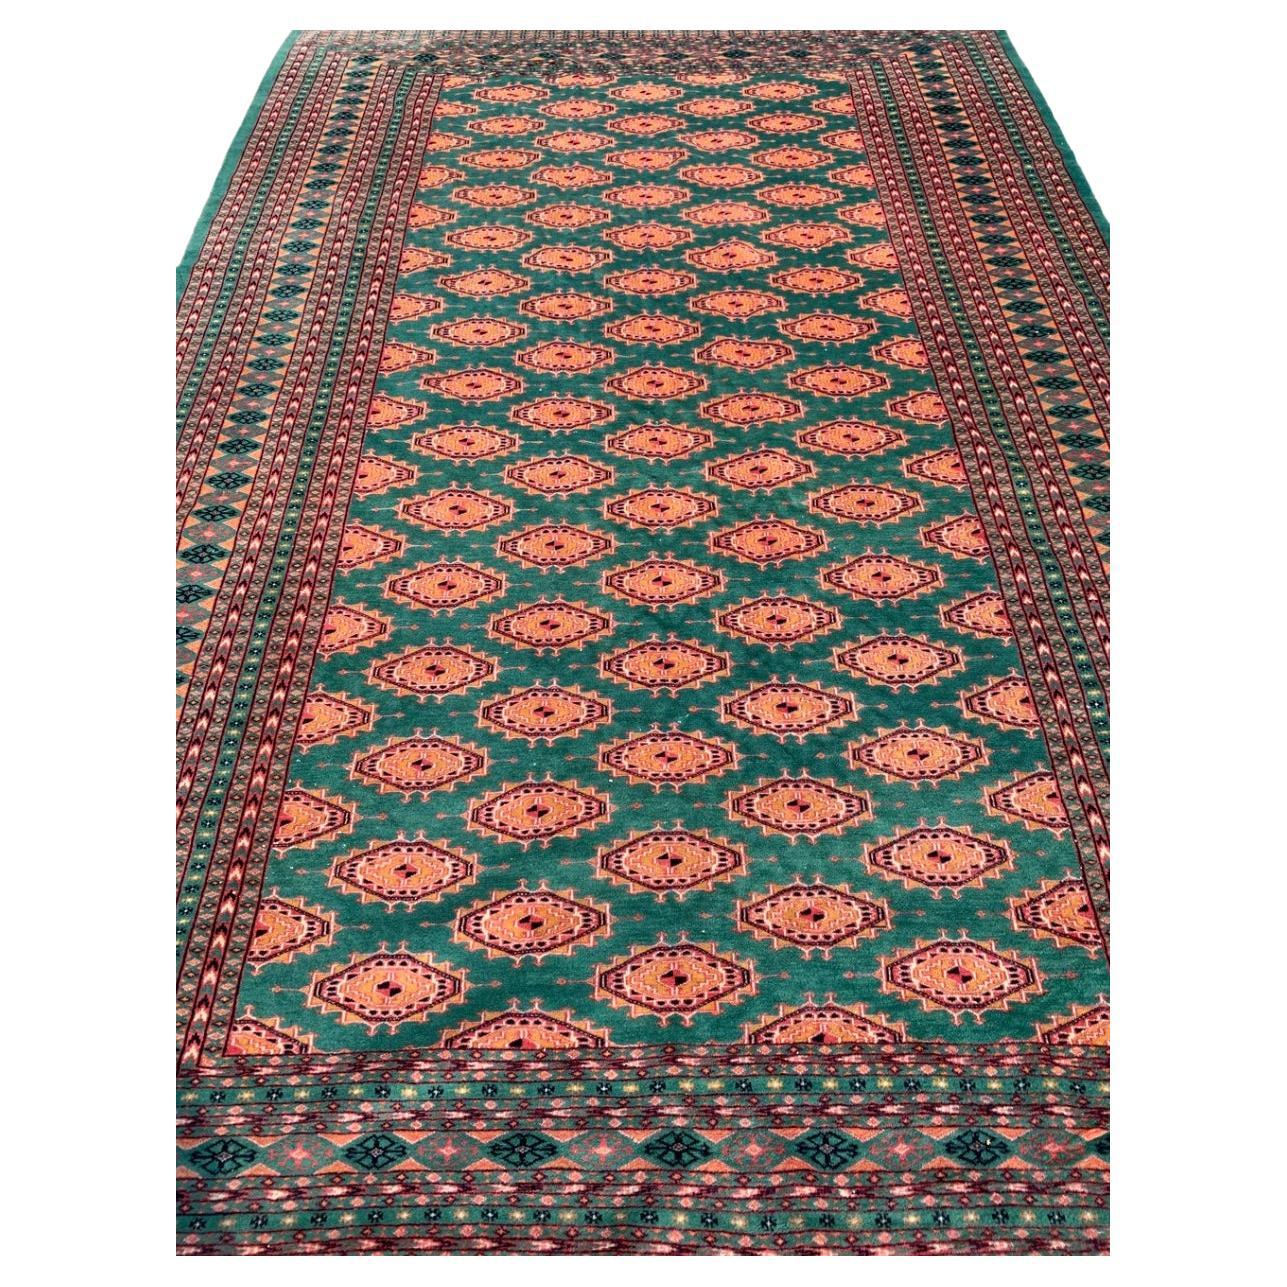 Pakistani Bukhara Carpet in Orange and Green from the 1970s